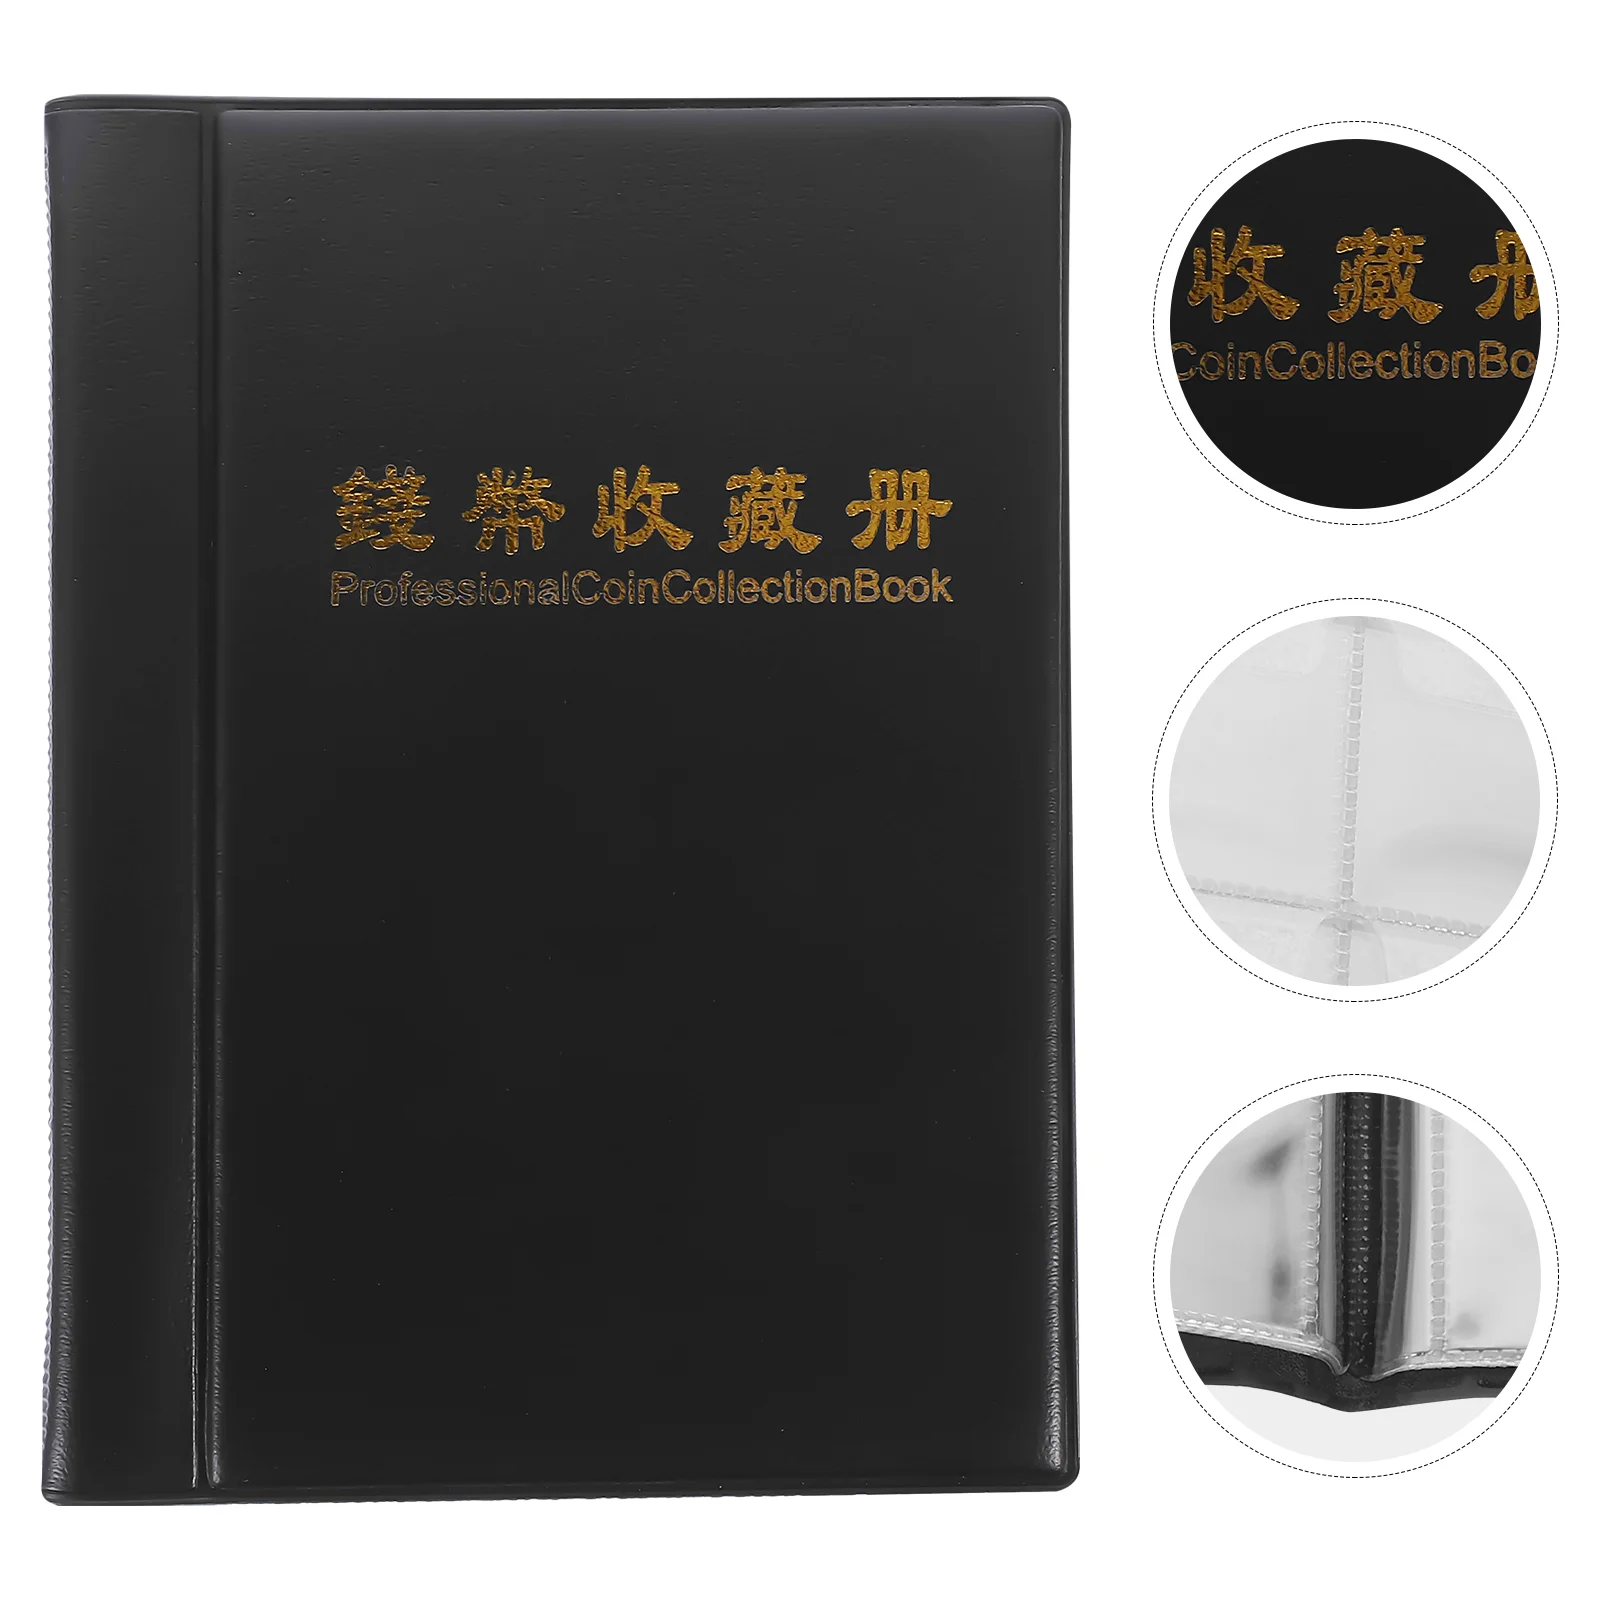 

Coin Collection Book Commemorative Rose Black Albums for Collectors Organizer Photo Collecting Decorative